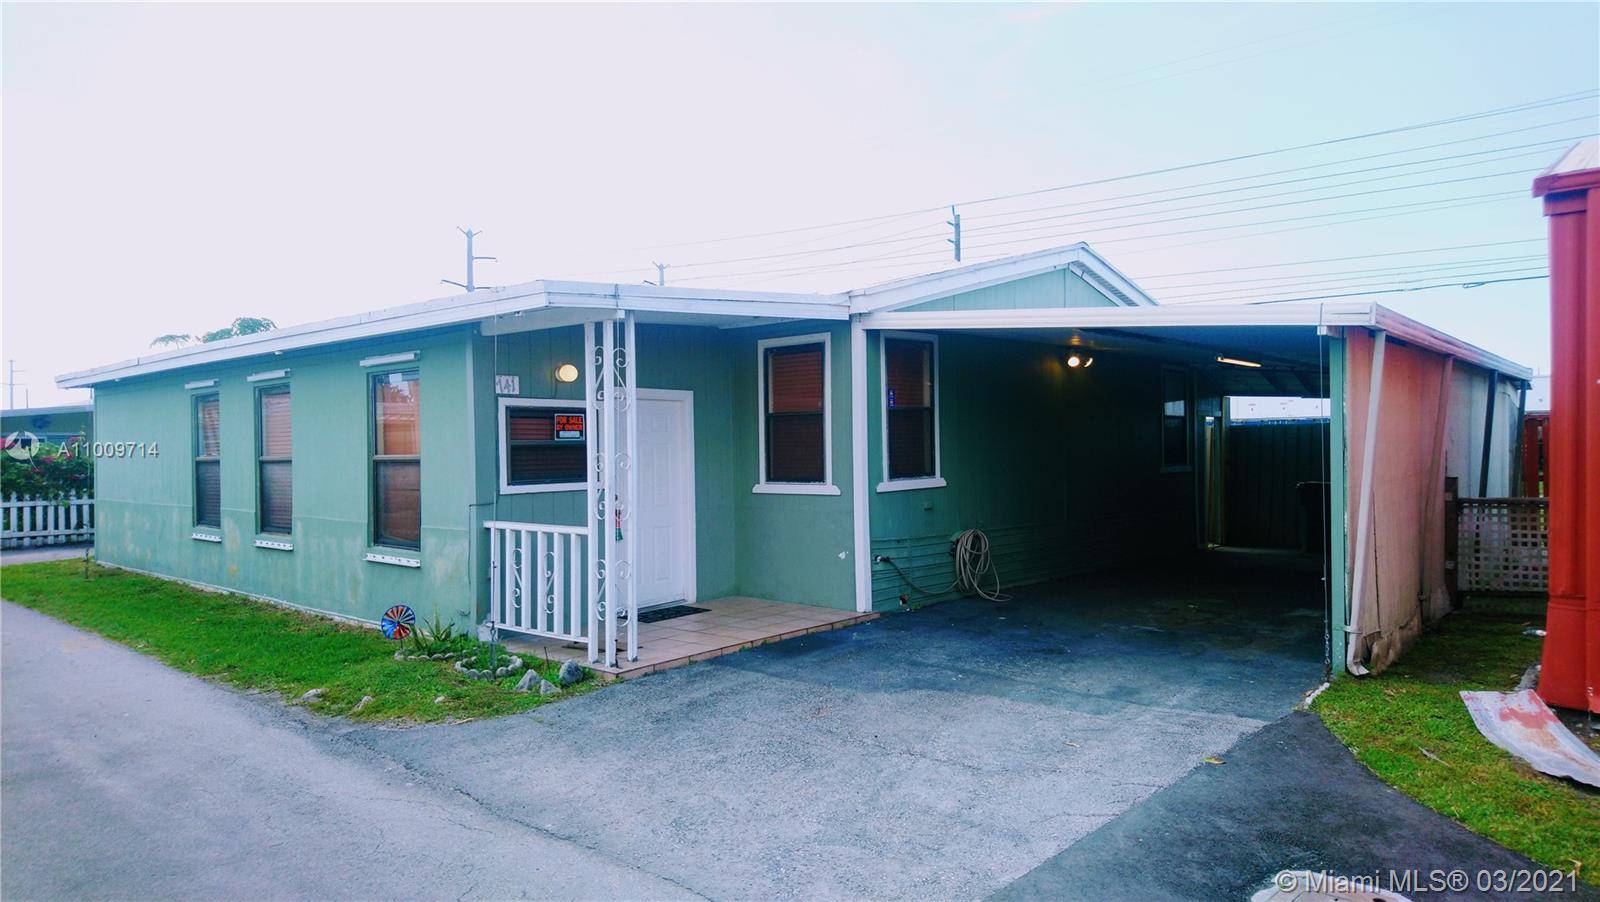 LAKESIDE RETIREMENT PARK Mobile Home in great condition, spacious and remodeled.